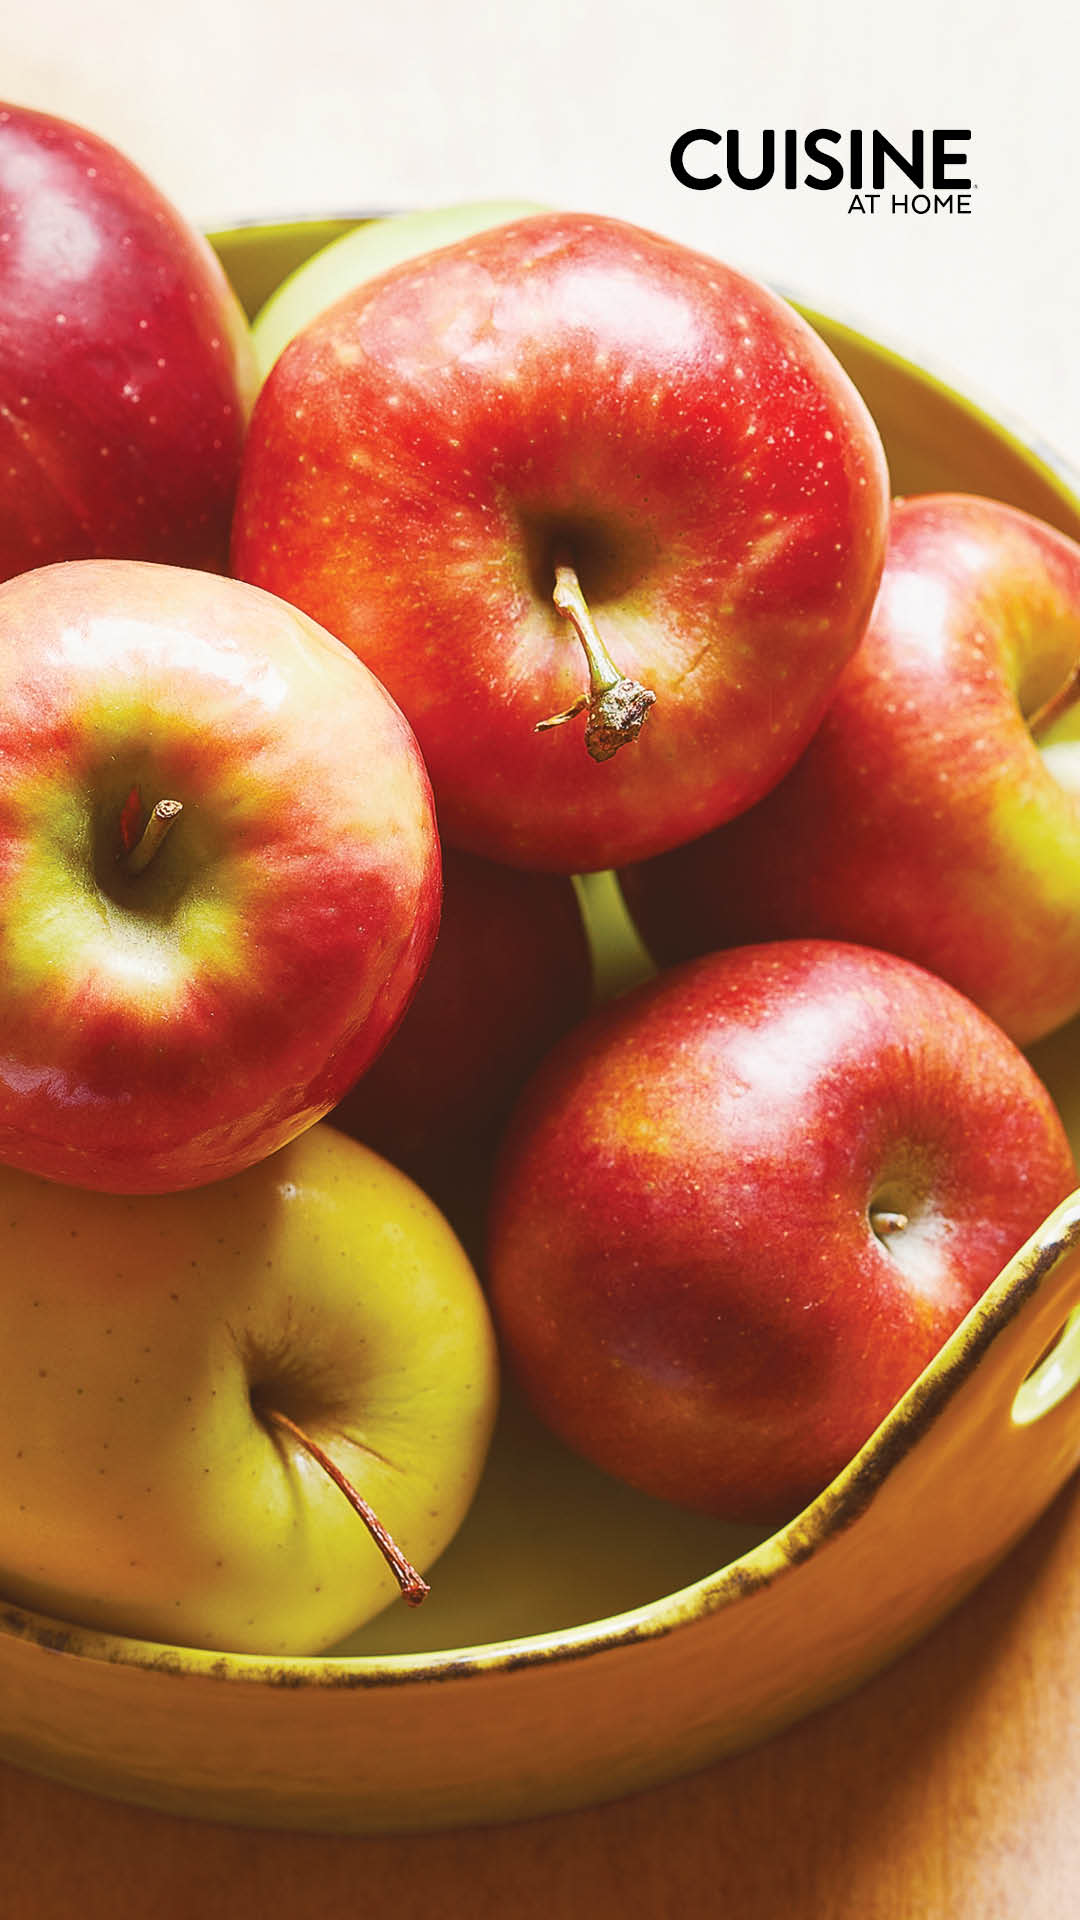 Free mobile wallpaper image with apples from Cuisine at Home